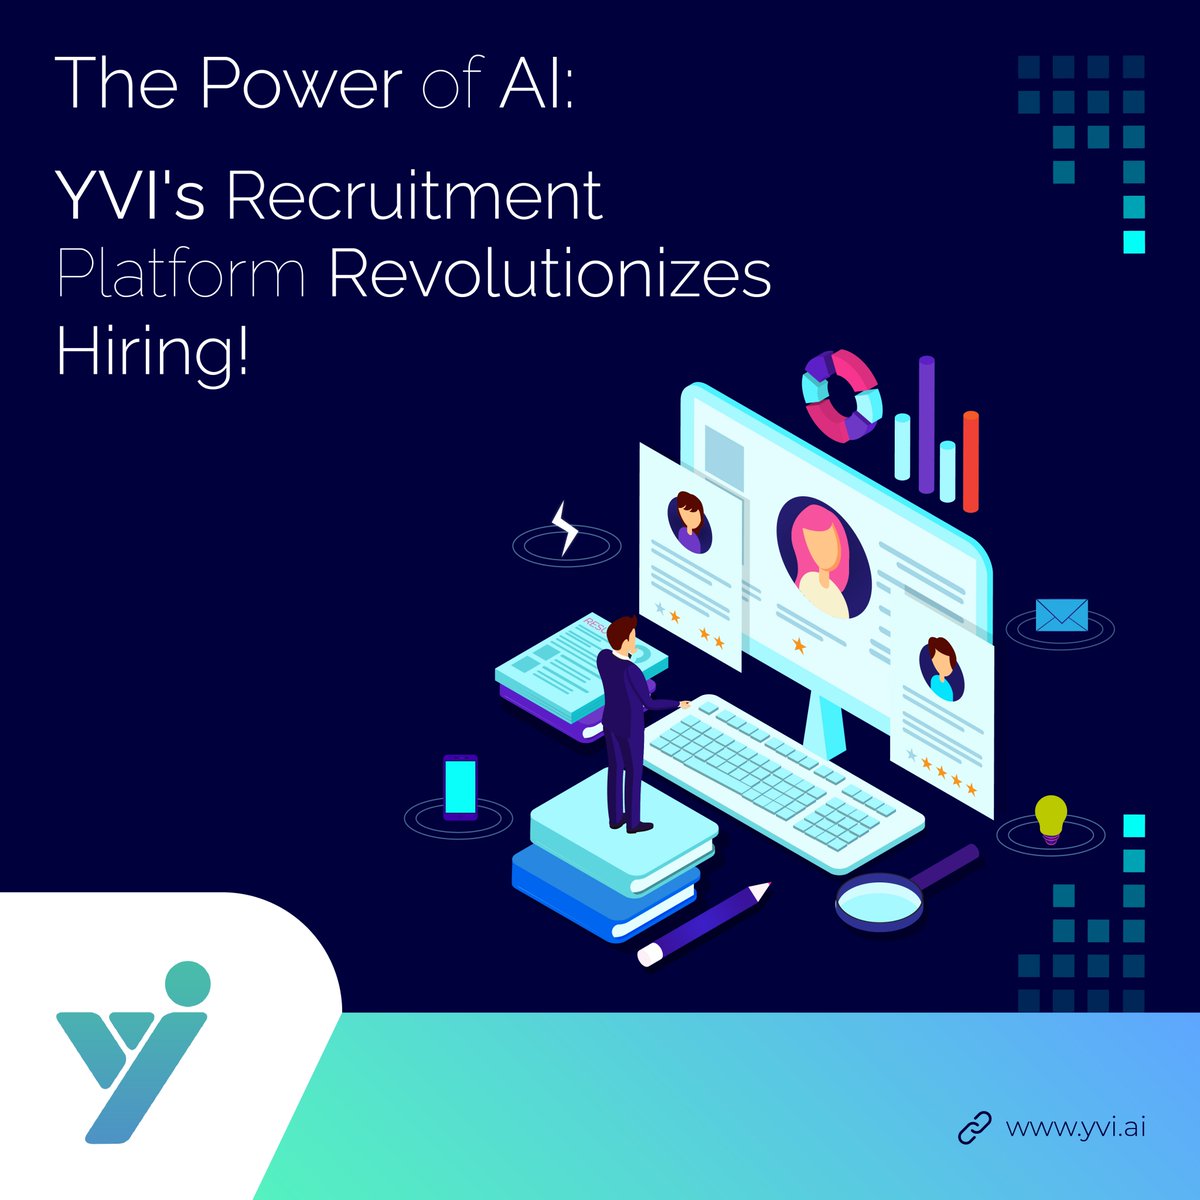 Discover the game-changer in recruitment technology! Explore how YVI's cutting-edge AI recruitment platform is revolutionizing the hiring process. 

yvi.ai/how-does-yvis-…

#RecruitmentRevolution #AIInHiring #GameChangerTech #CuttingEdgeRecruitment #StreamlinedProcess